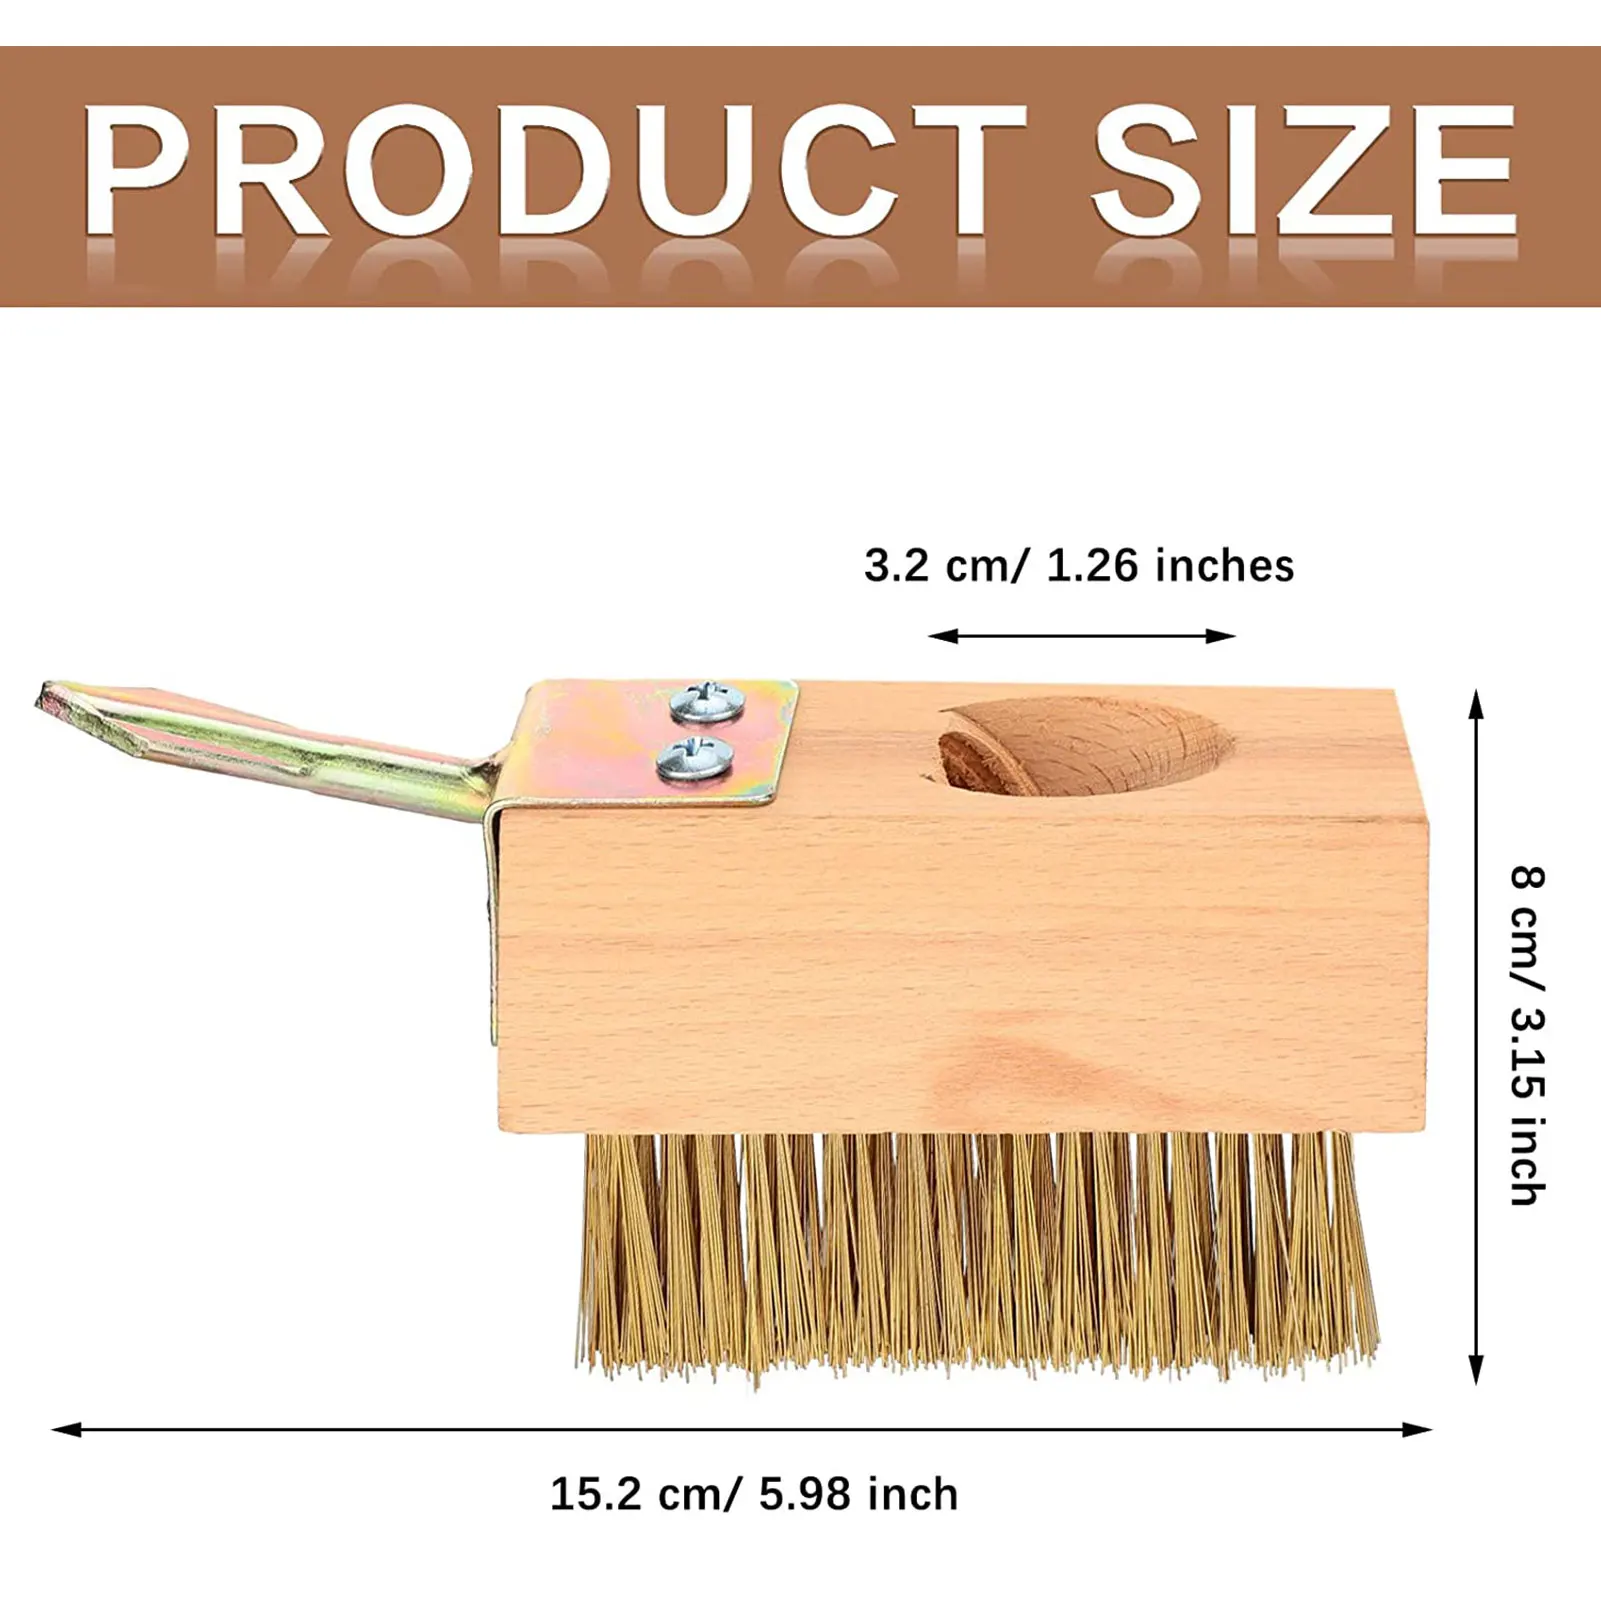 Brush Weed Remover Tool Cleaning Weeding Moss Garden Wire Removal Yard Tools Patio Scrubber Outdoor Paving Paver Deck, Size: 7.09 x 5.91 x 3.15